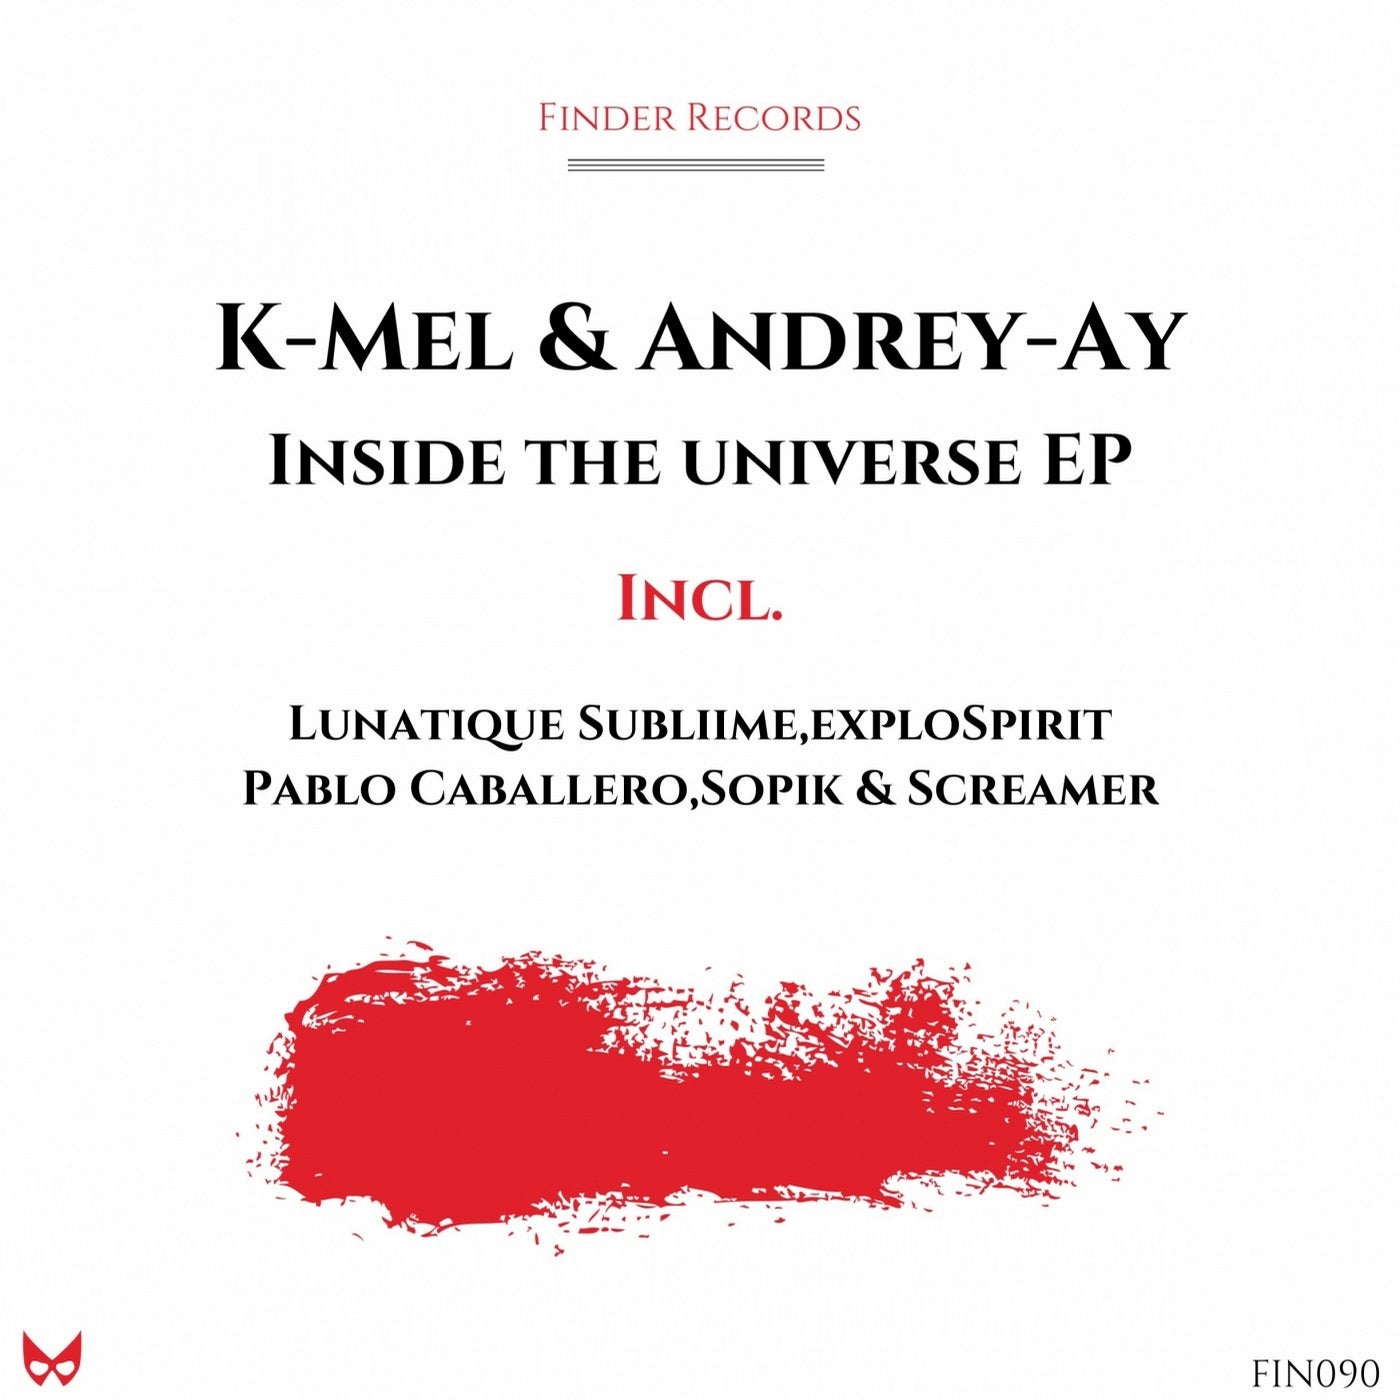 Inside the Universe EP